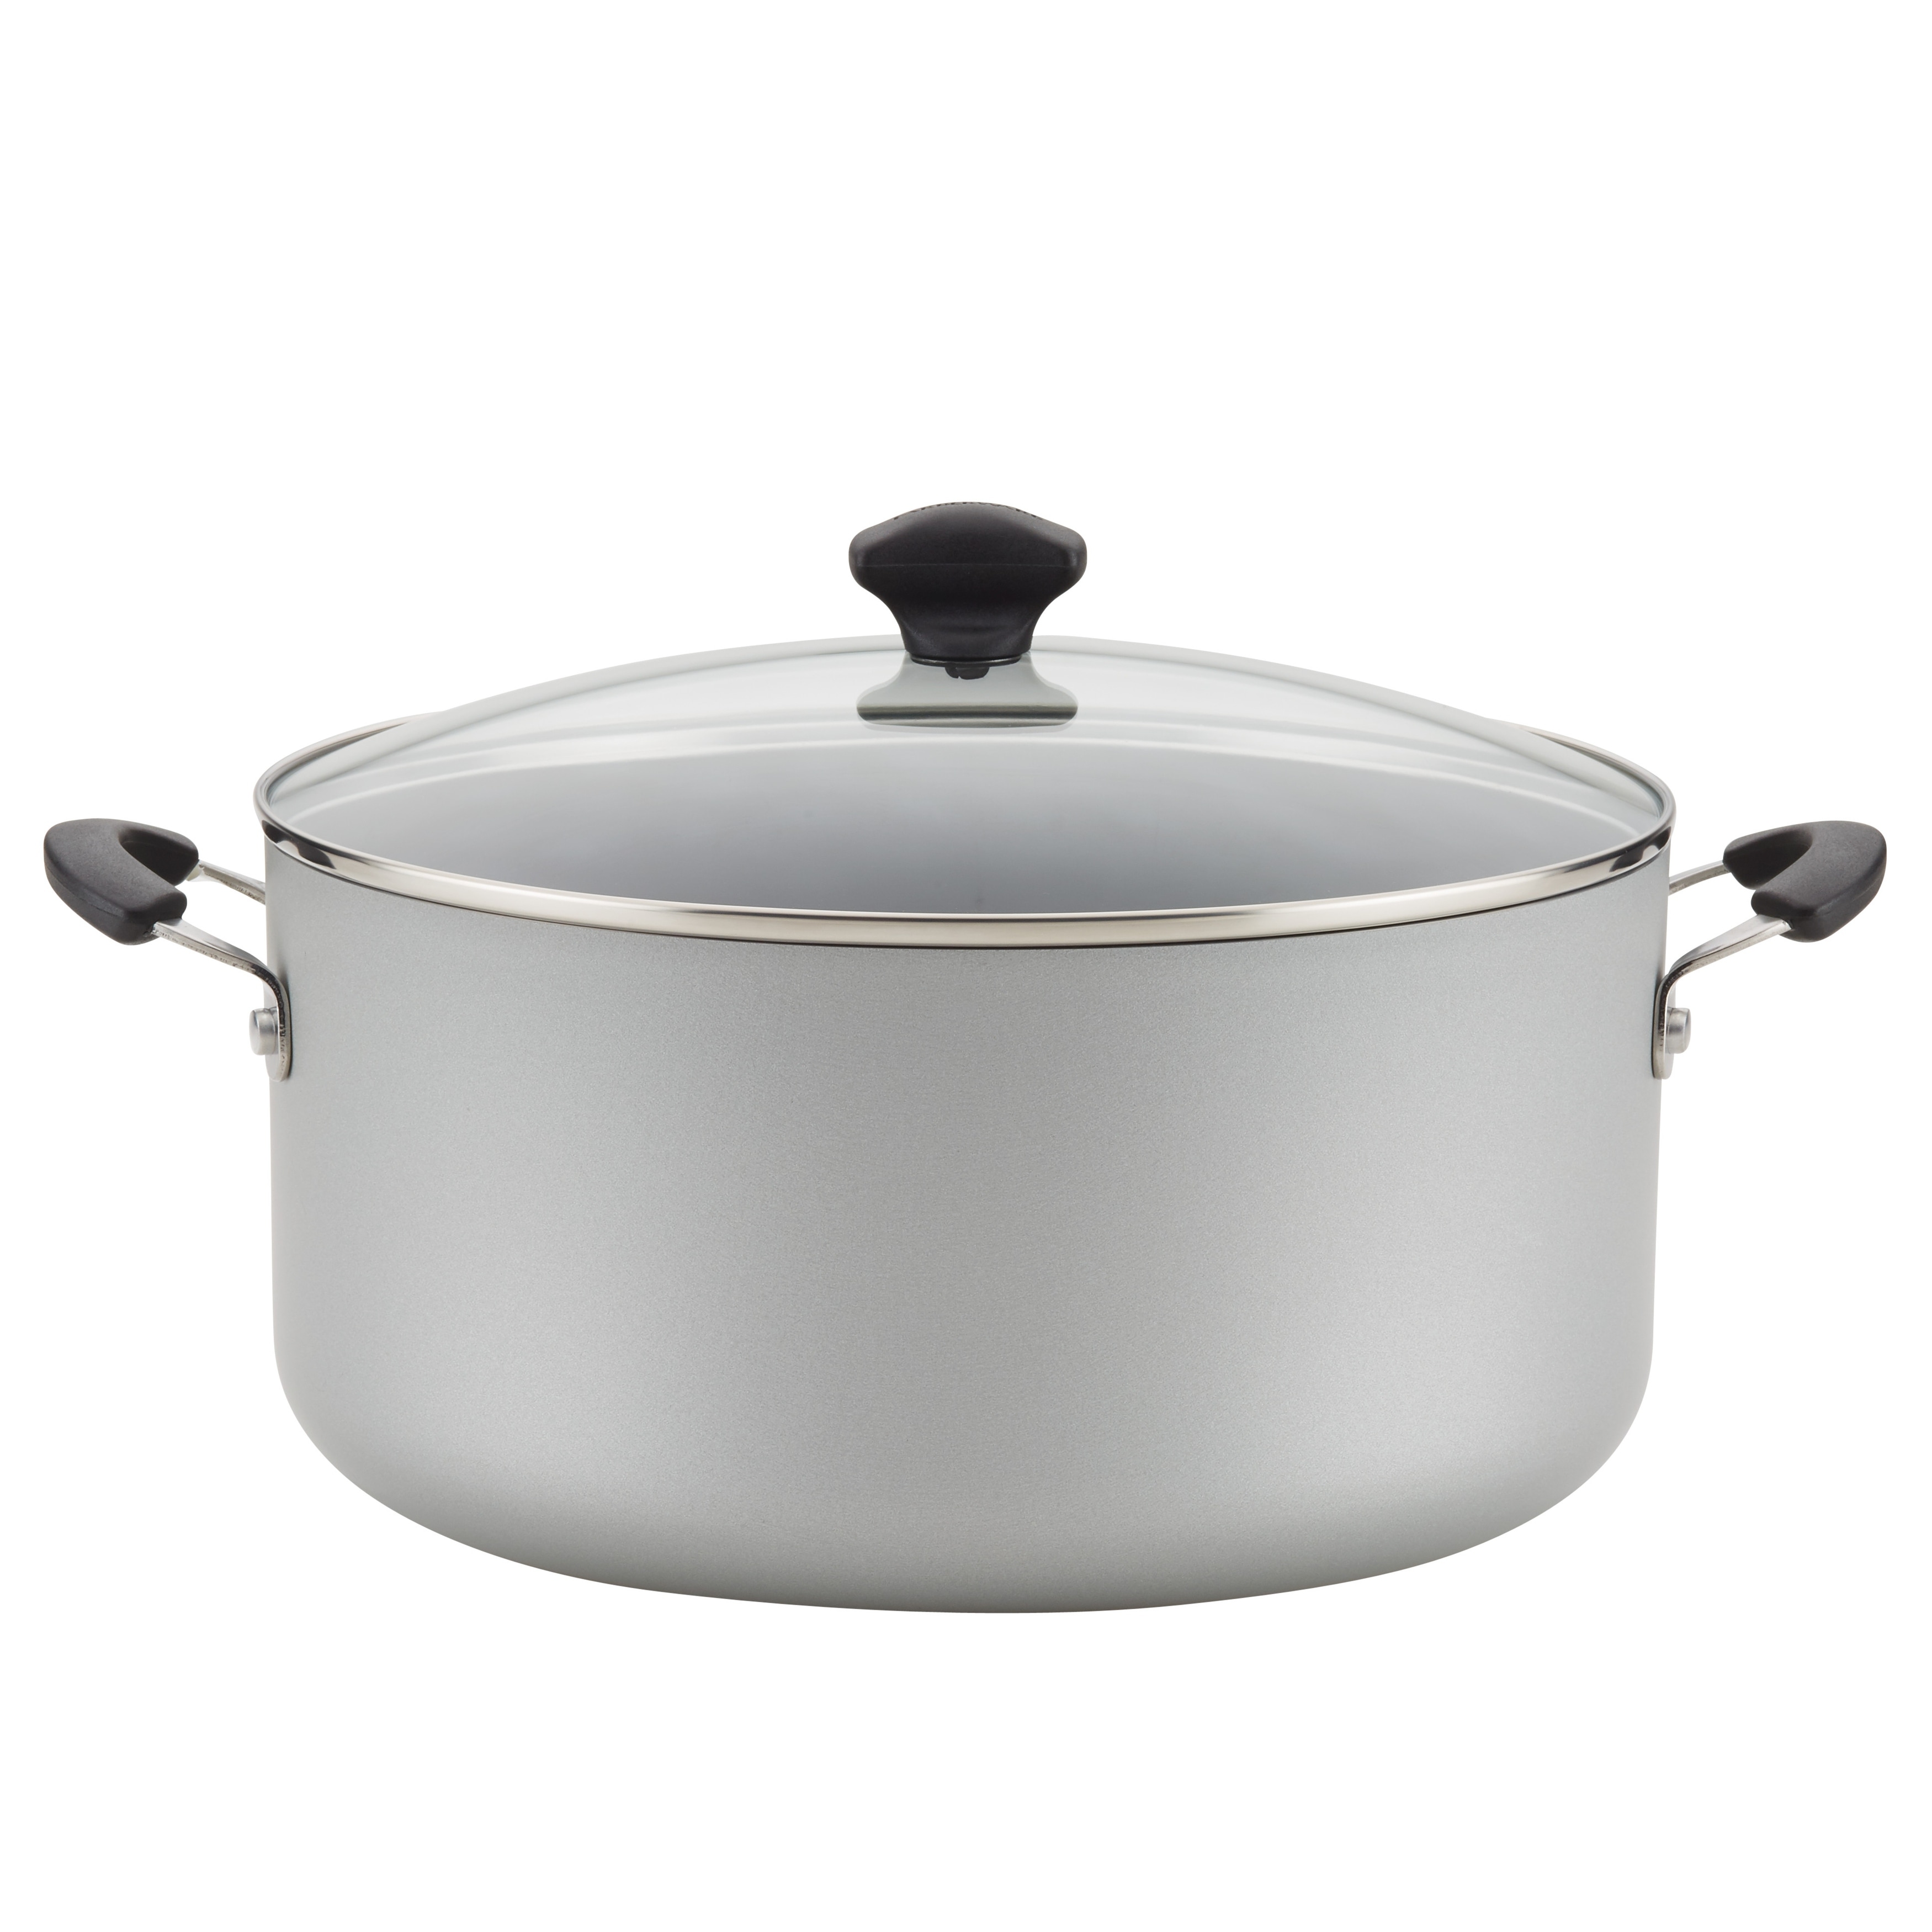 https://ak1.ostkcdn.com/images/products/is/images/direct/0ce80ab6deebfc2e6acdd1ed2c1a214404c54885/Farberware-Cookware-Aluminum-Nonstick-Covered-Stockpot%2C-10.5-Quart%2C-Silver.jpg